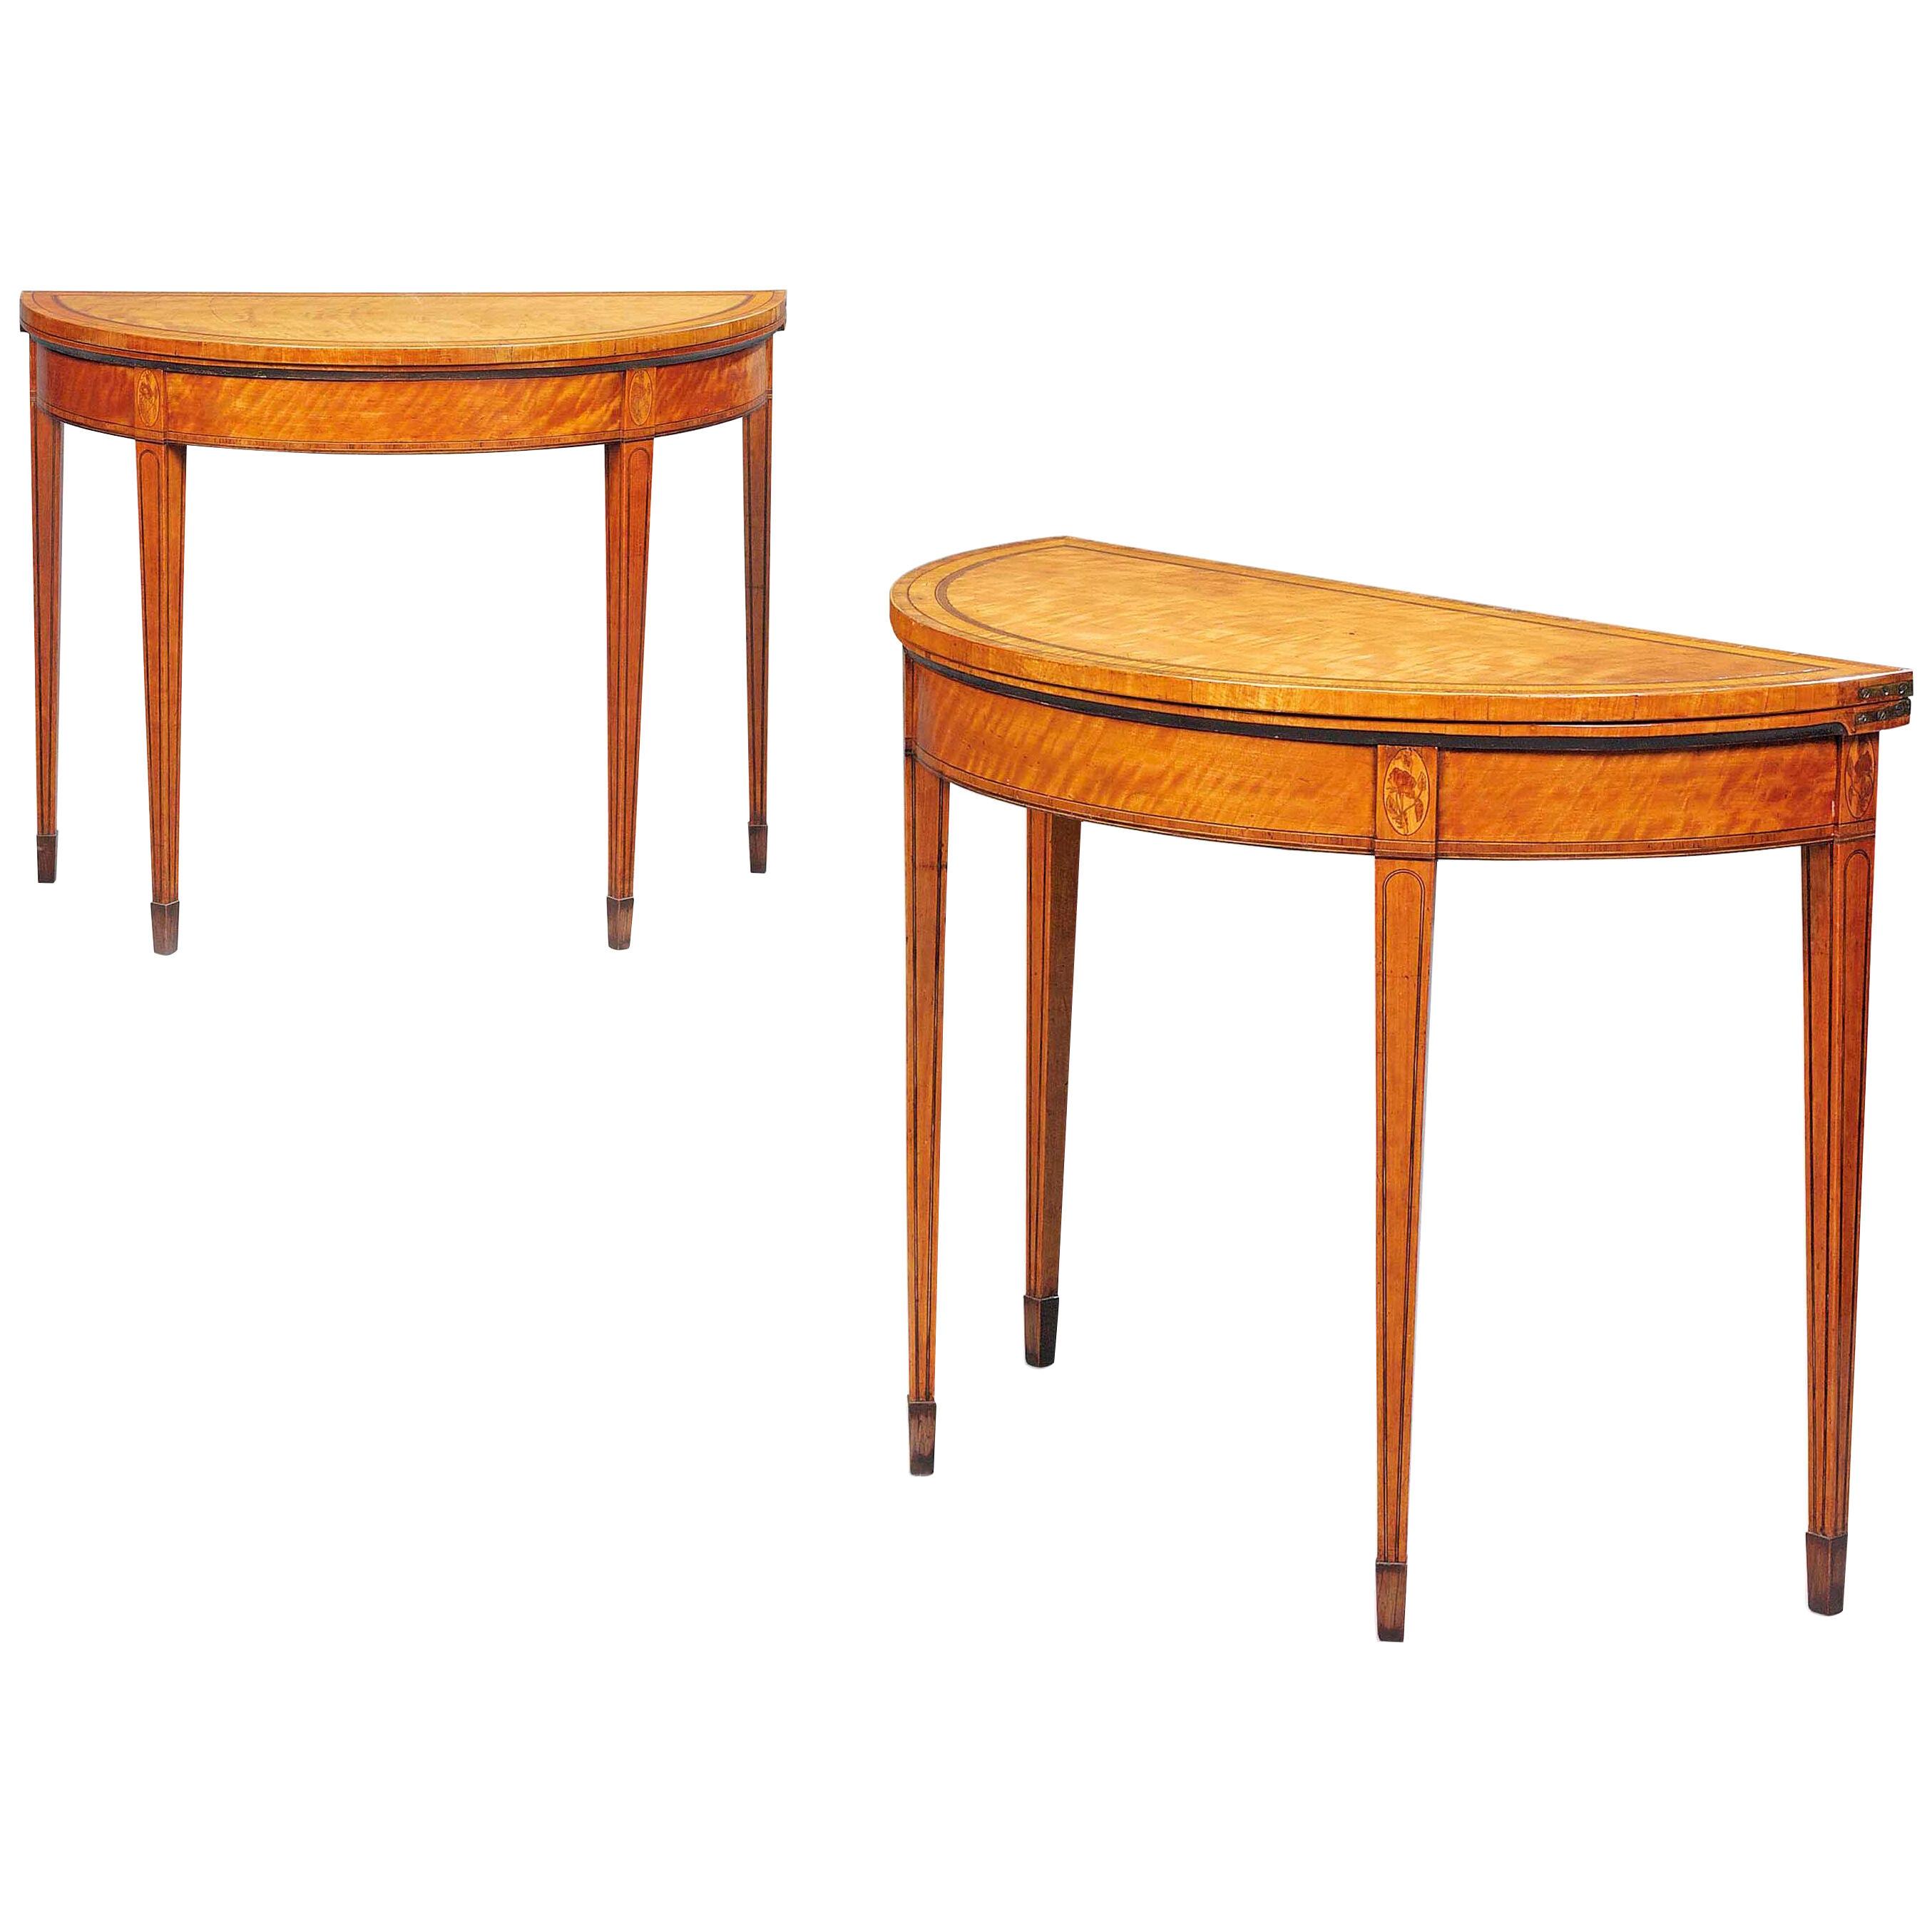 A pair of George III Sheraton period satinwood & tulipwood banded card tables